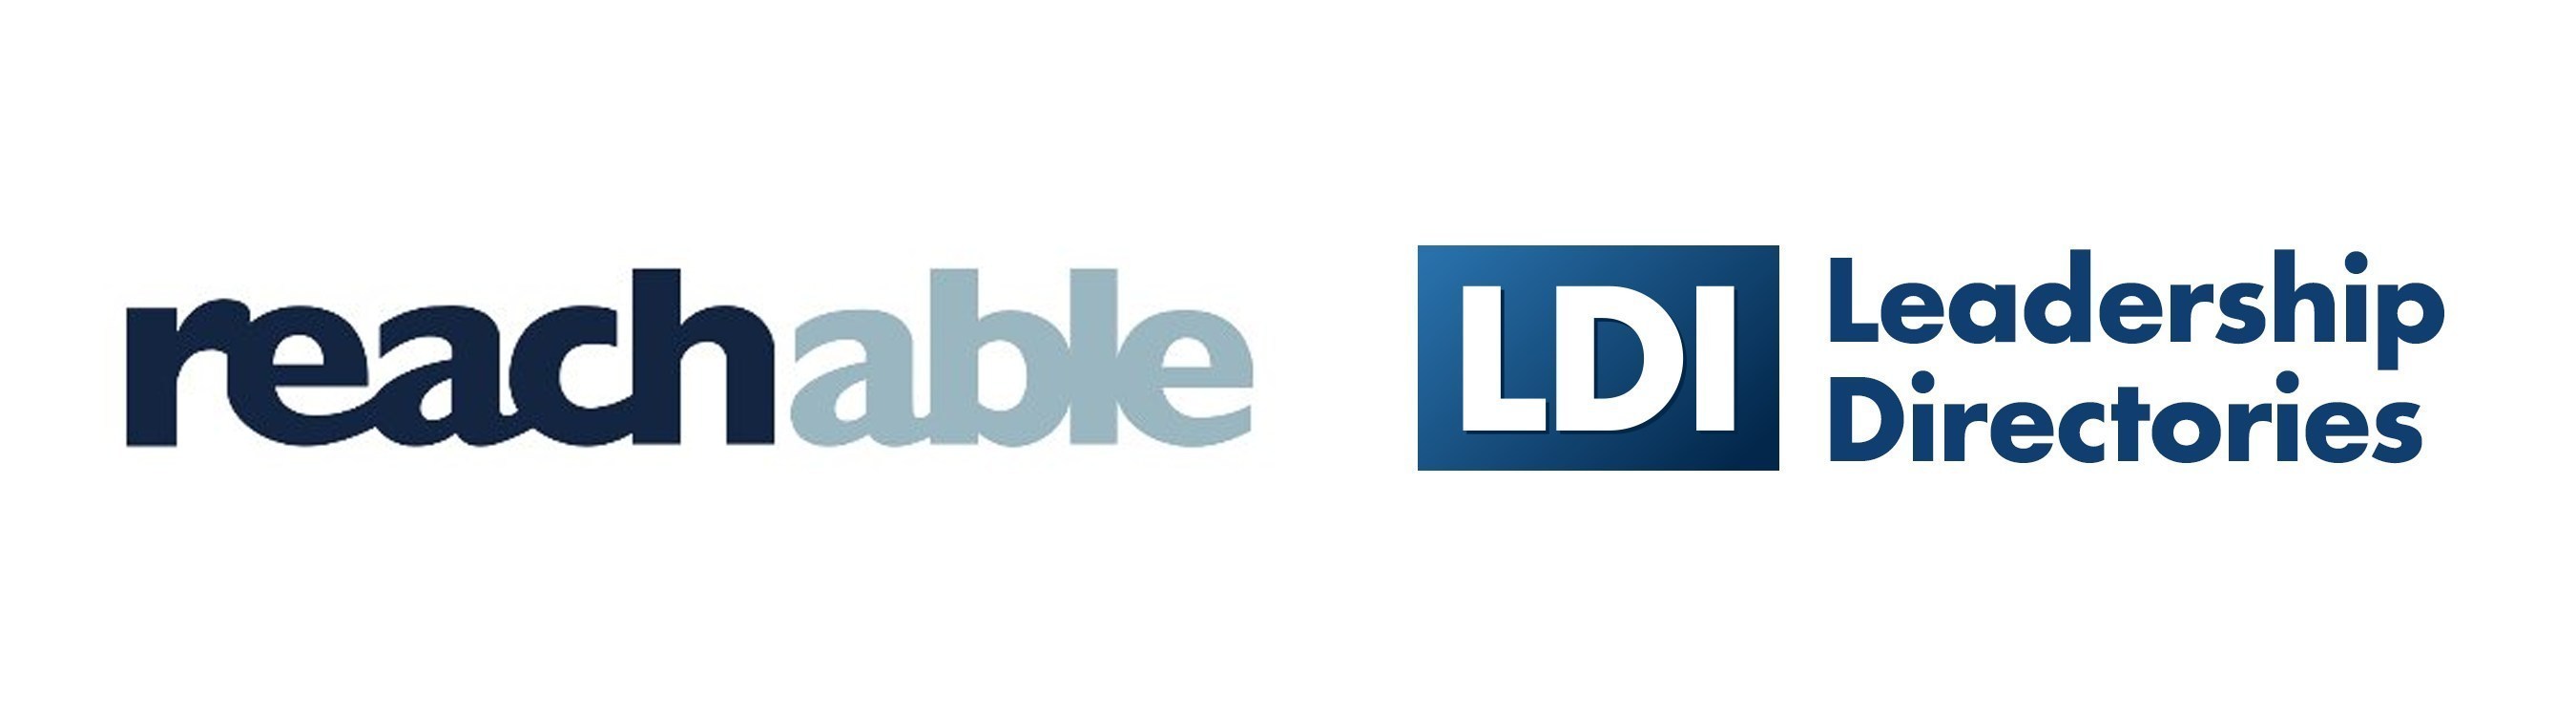 Reachable, Inc. and Leadership Directories, Inc. (LDI) Announce Data Partnership. LDI's trusted and accurate information is now available on the Reachable platform, so users can easily uncover and leverage pathways between their own best contacts and new, high-quality prospects.